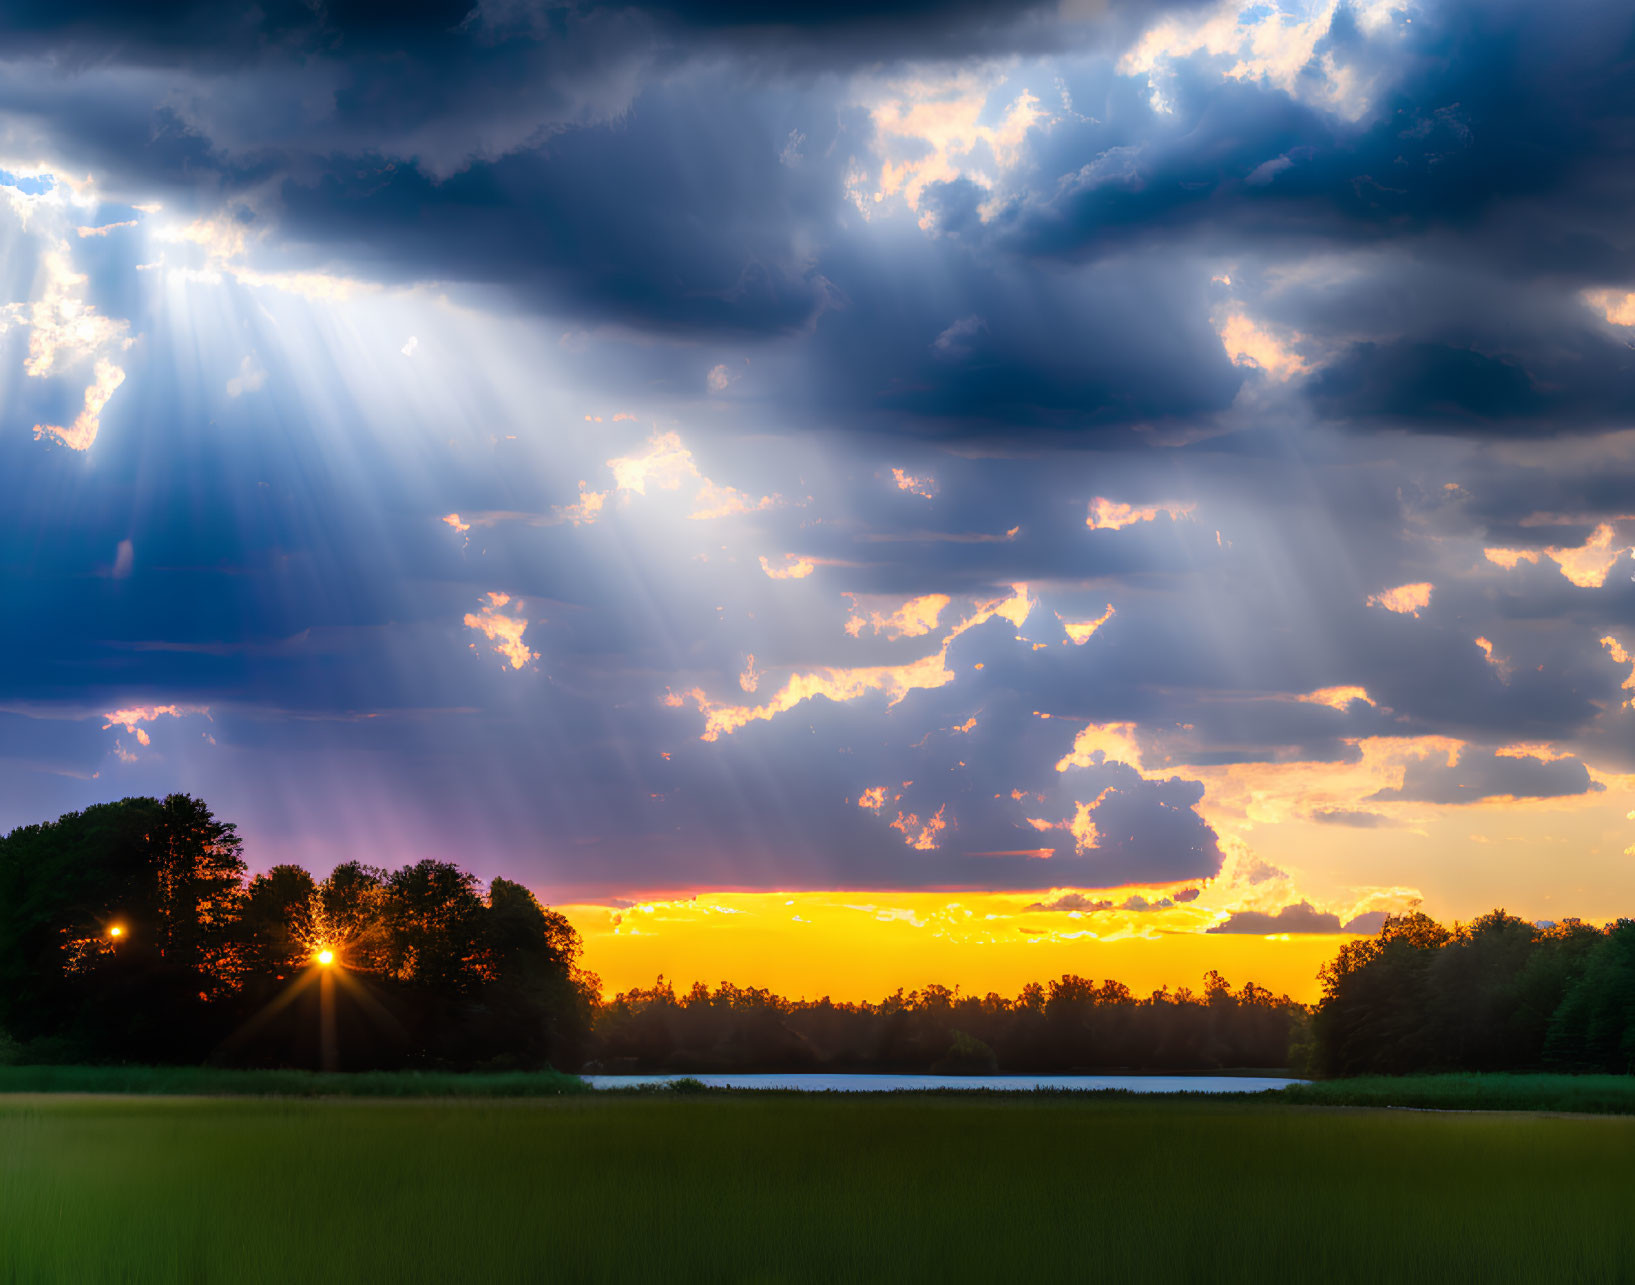 Dramatic sunset scene over field with sunbeams and water reflections